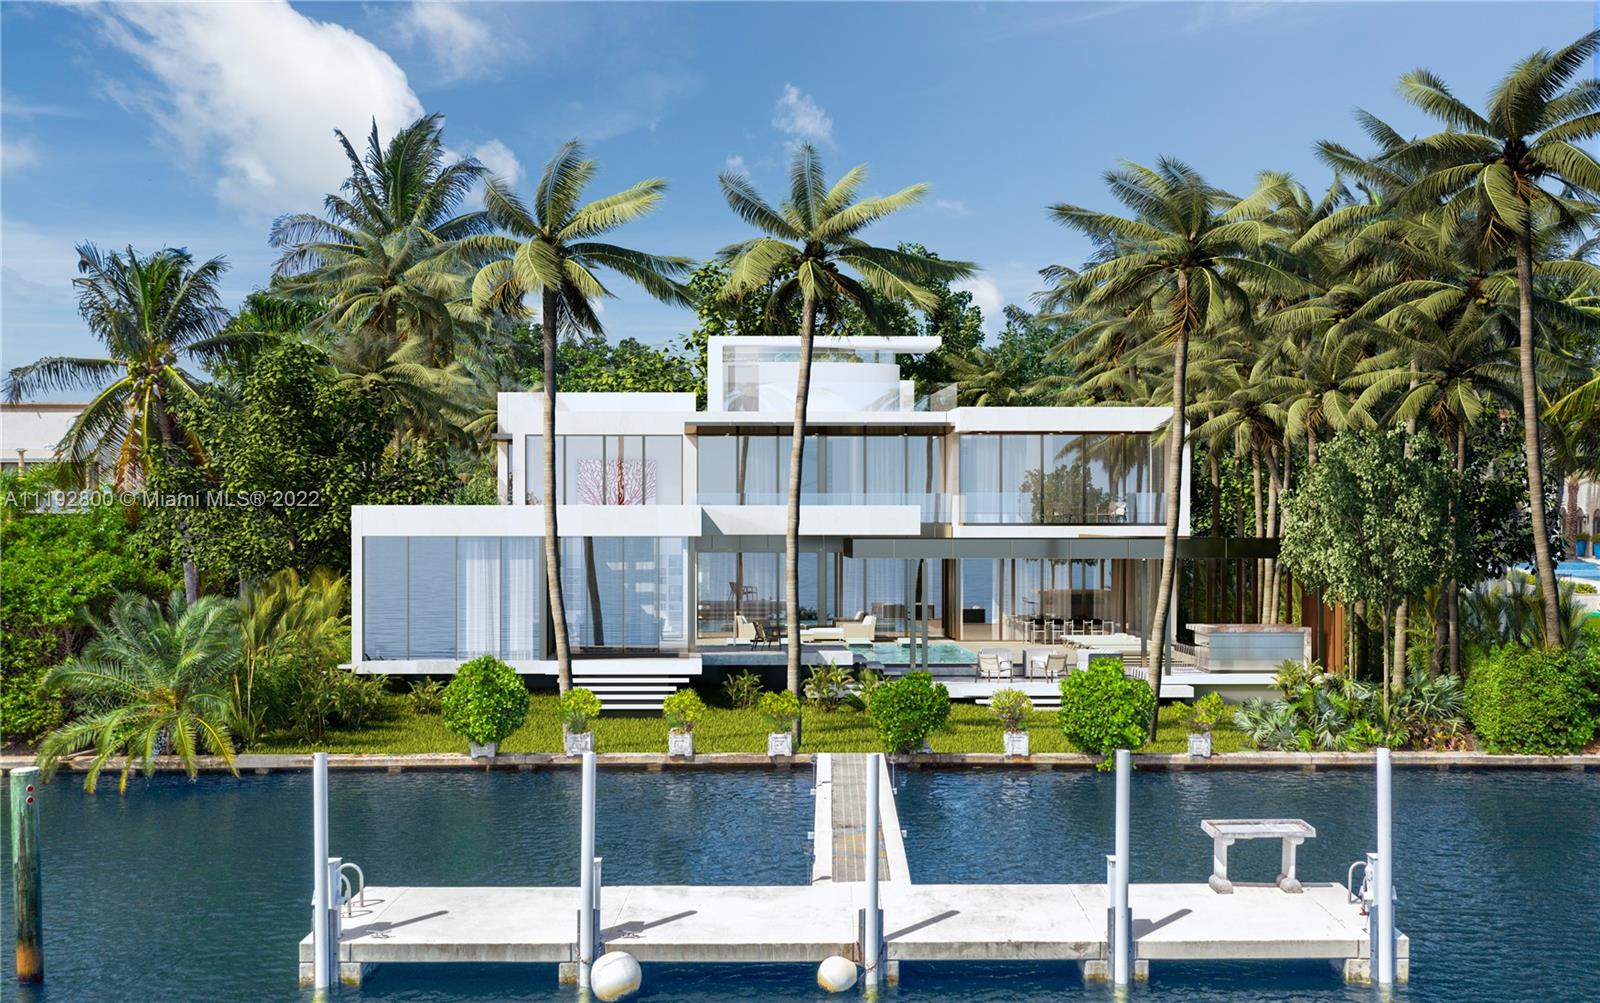 Step Inside With Me! Seller NOW Accepting Cryptocurrency. New Construction Opportunity! 37 Indian Creek Island Road - the most elite available property in town. Developed by Todd Michael Glaser with Architecture and Interiors by Kobi Karp, this nearly 16,000 SF grand compound will be move-in ready in less than 18 months. Featuring 12 beds, 12ft ceilings on main level, Club Room, Chef/Prep Kitchens, Media, Gym Studio and situated on a 53,696 SF lot with 134 feet of water, this modern marvel will be the number one property on the island, home to Ivanka, Gisele, Iglesias, & titans of industry. Known as Billionaire's Bunker, this 300-acre island hosts less than 40 homes, secured by its own police force, and anchored by the Indian Creek Golf Course.